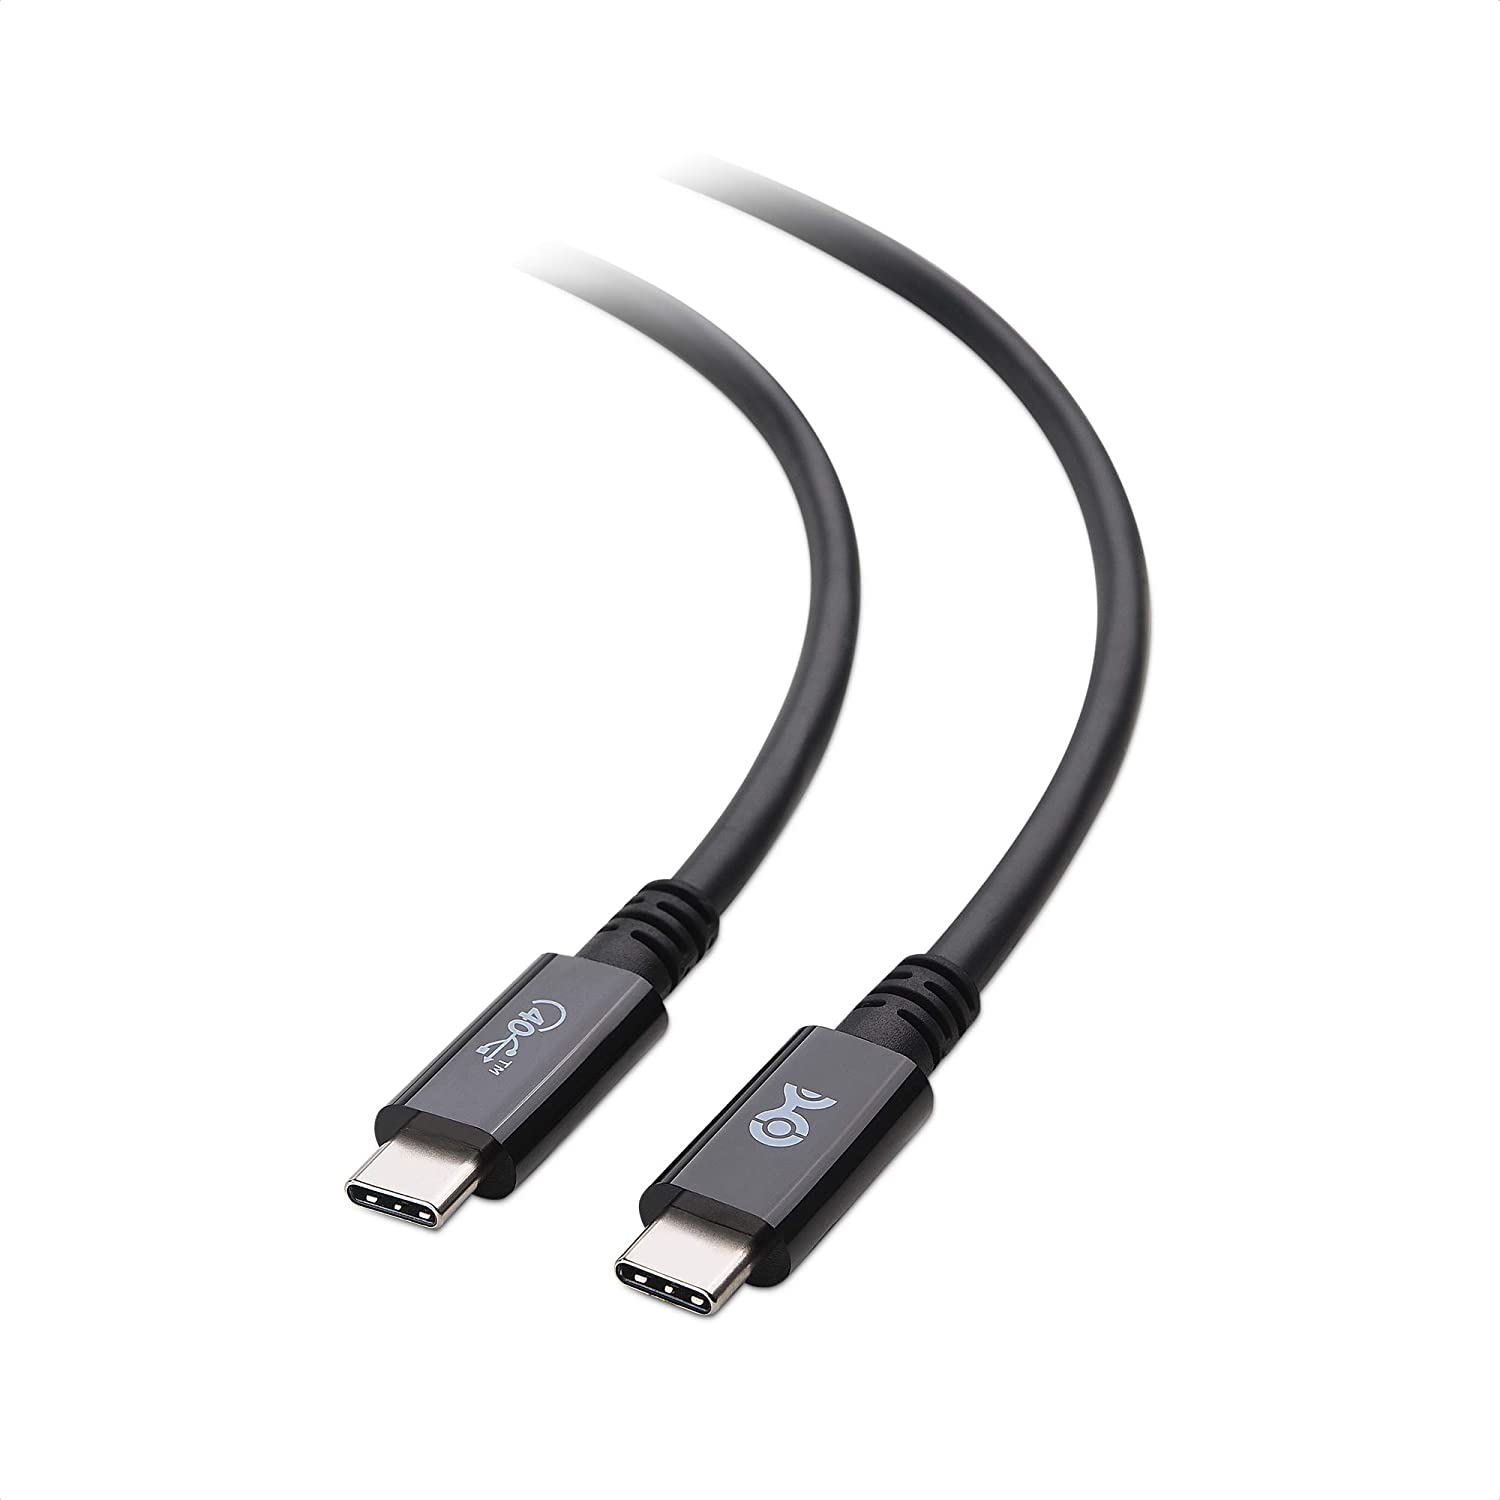 Cable Matters 6-foot USB C cable